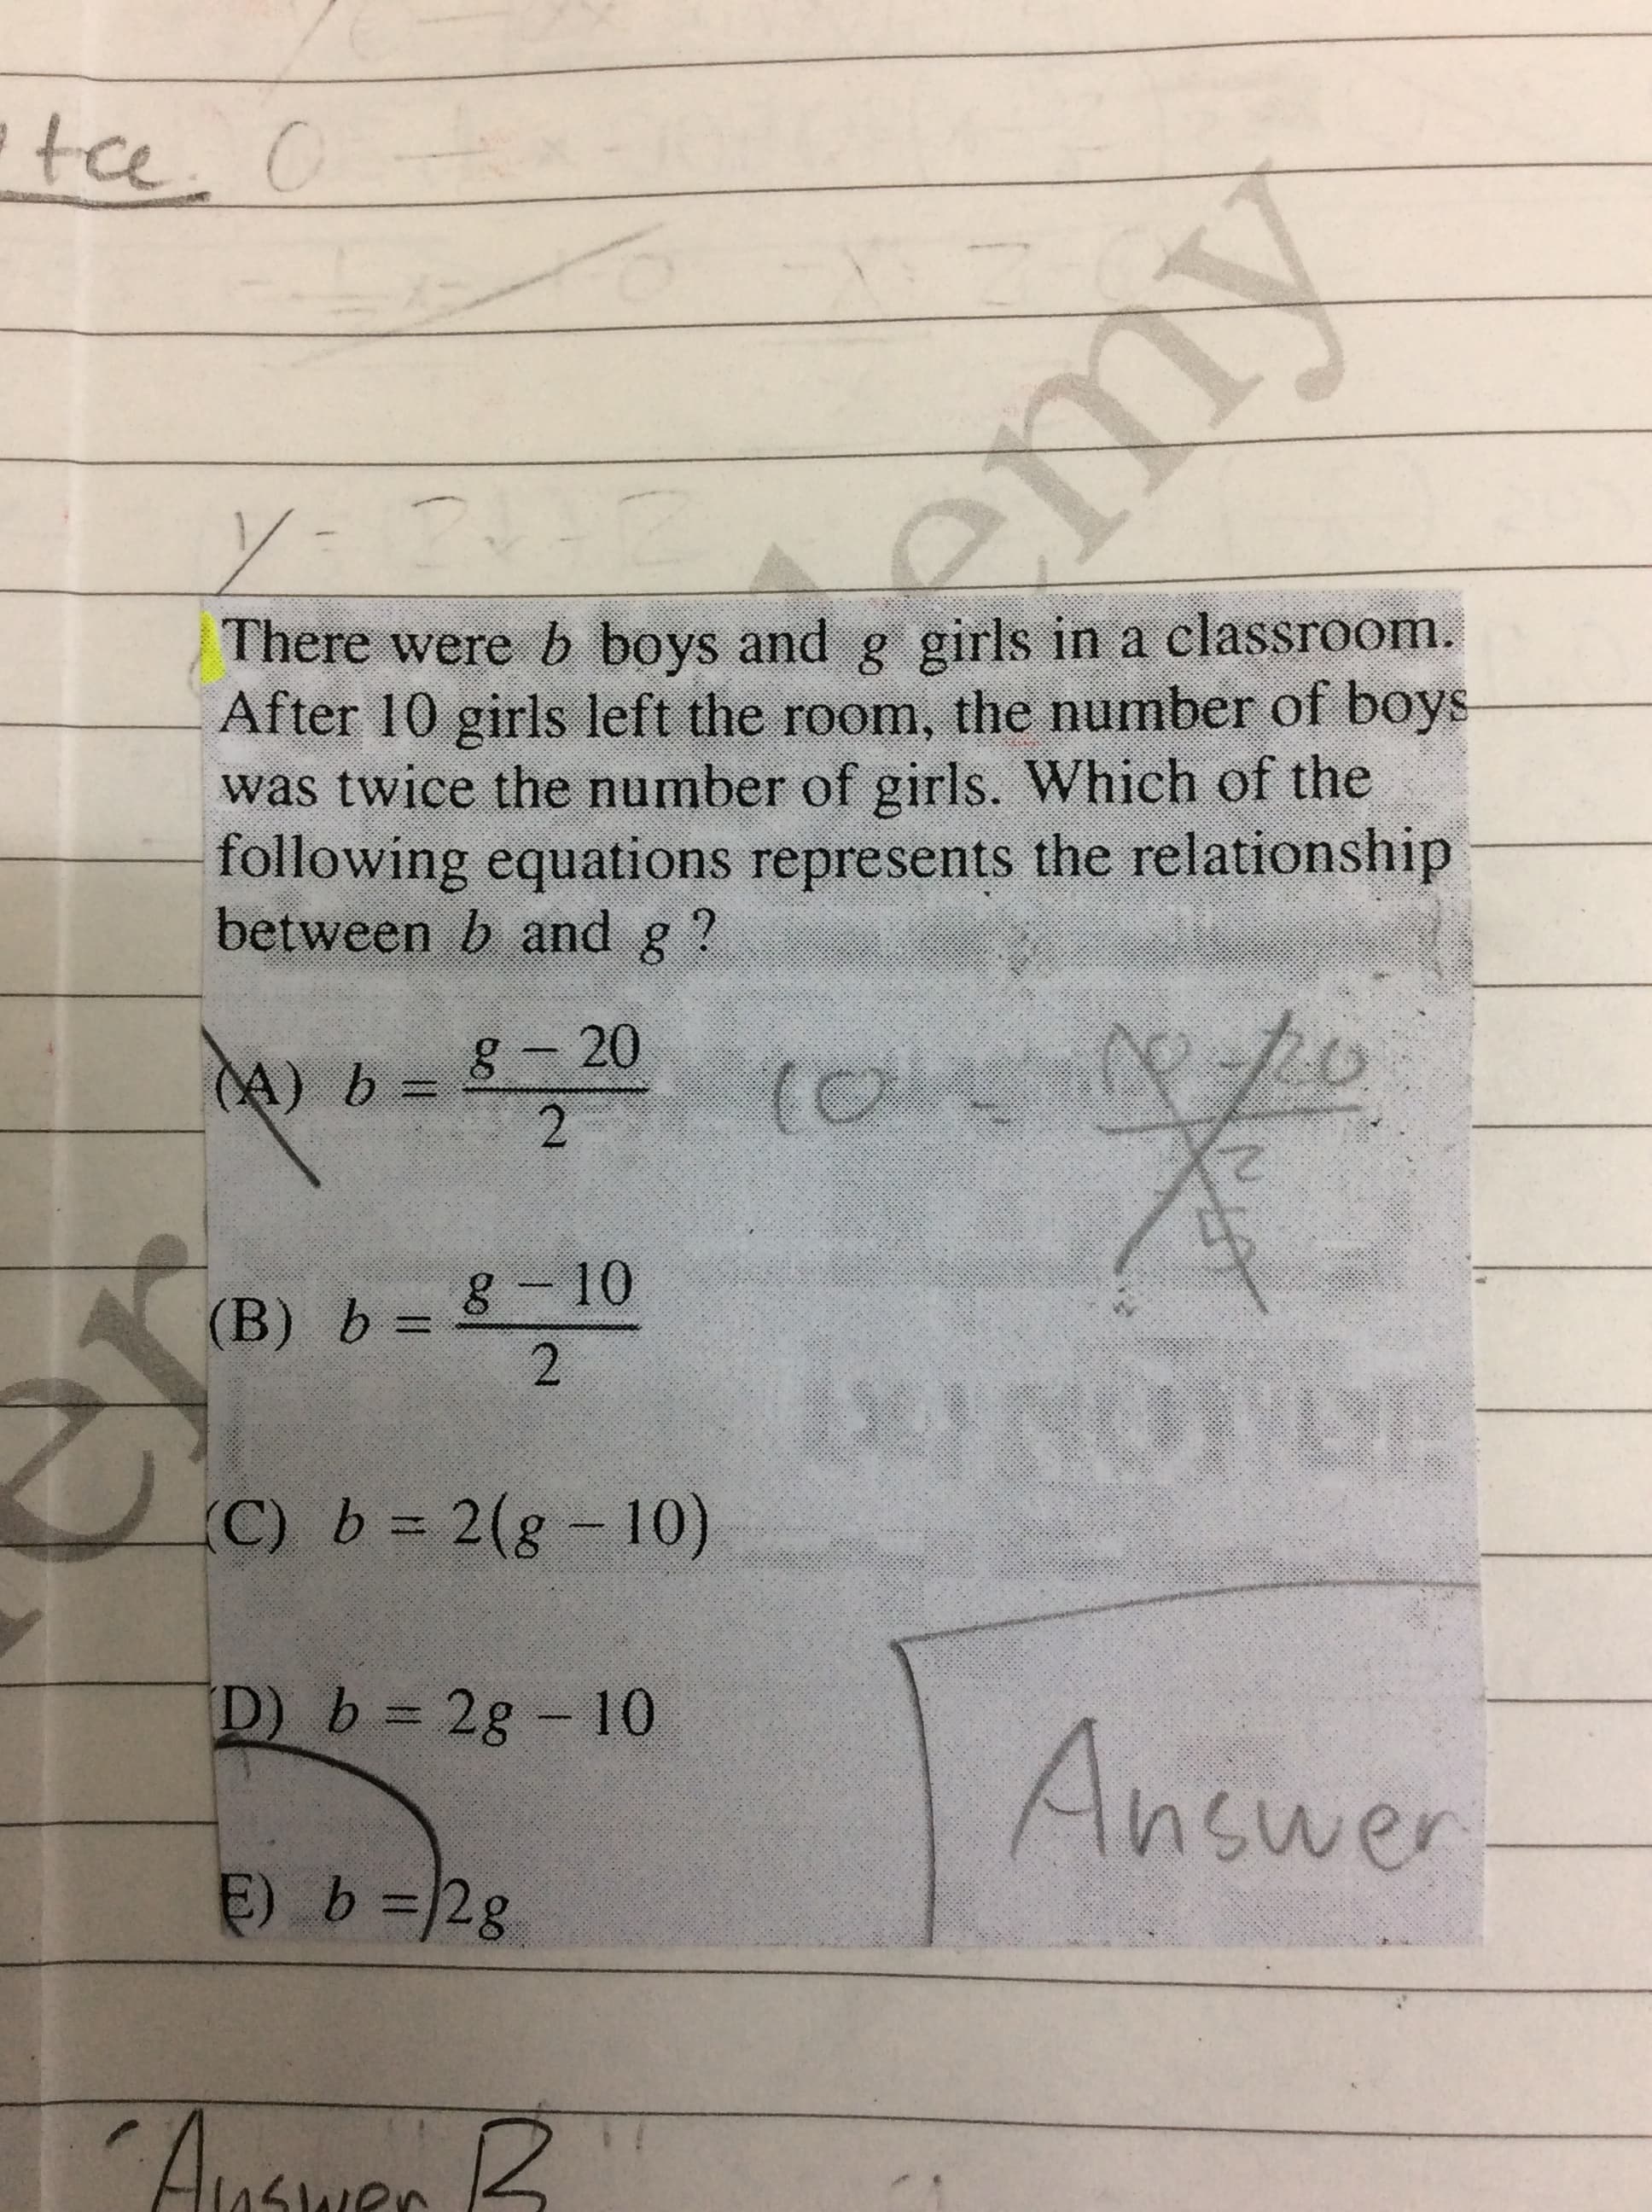 There were b boys and g girls in a classroom.
After 10 girls left the room, the number of boys
was twice the number of girls. Which of the
following equations represents the relationship
between b and
8-20
(A) b
2)
8-10
(B) b =
(C) b = 2(g - 10)
D) b = 2g - 10
%3D
Answer
E) b=2g
Auswes B
2.
